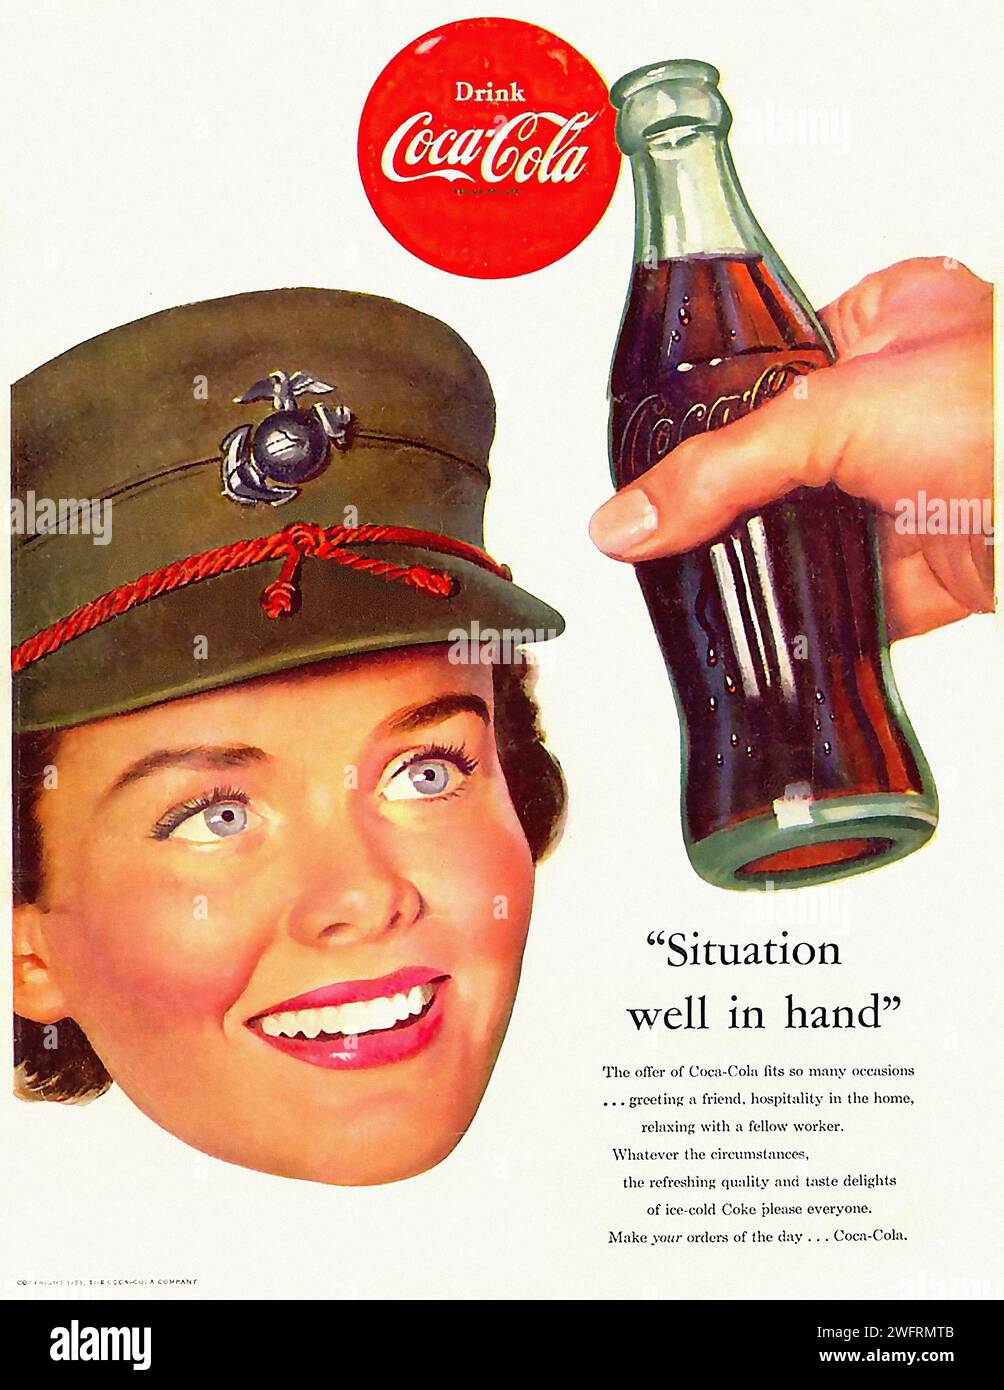 Drink Coca-Cola Situation well in hand Whether for the moment, relaxing with a friend, hospitality is the thing, or proving a point, Coca-Cola is always welcome Make your series of the day… Coca-Cola  A vintage advertisement for Coca-Cola featuring a hand holding a bottle of Coca-Cola. The bottle is a classic Coca-Cola bottle with a red label and white text. The background is a white background with a red circle that reads “Drink Coca-Cola”. The advertisement also features a woman wearing a green military cap with a red rope and a silver emblem. - American (U.S.) advertising, World War II era Stock Photo